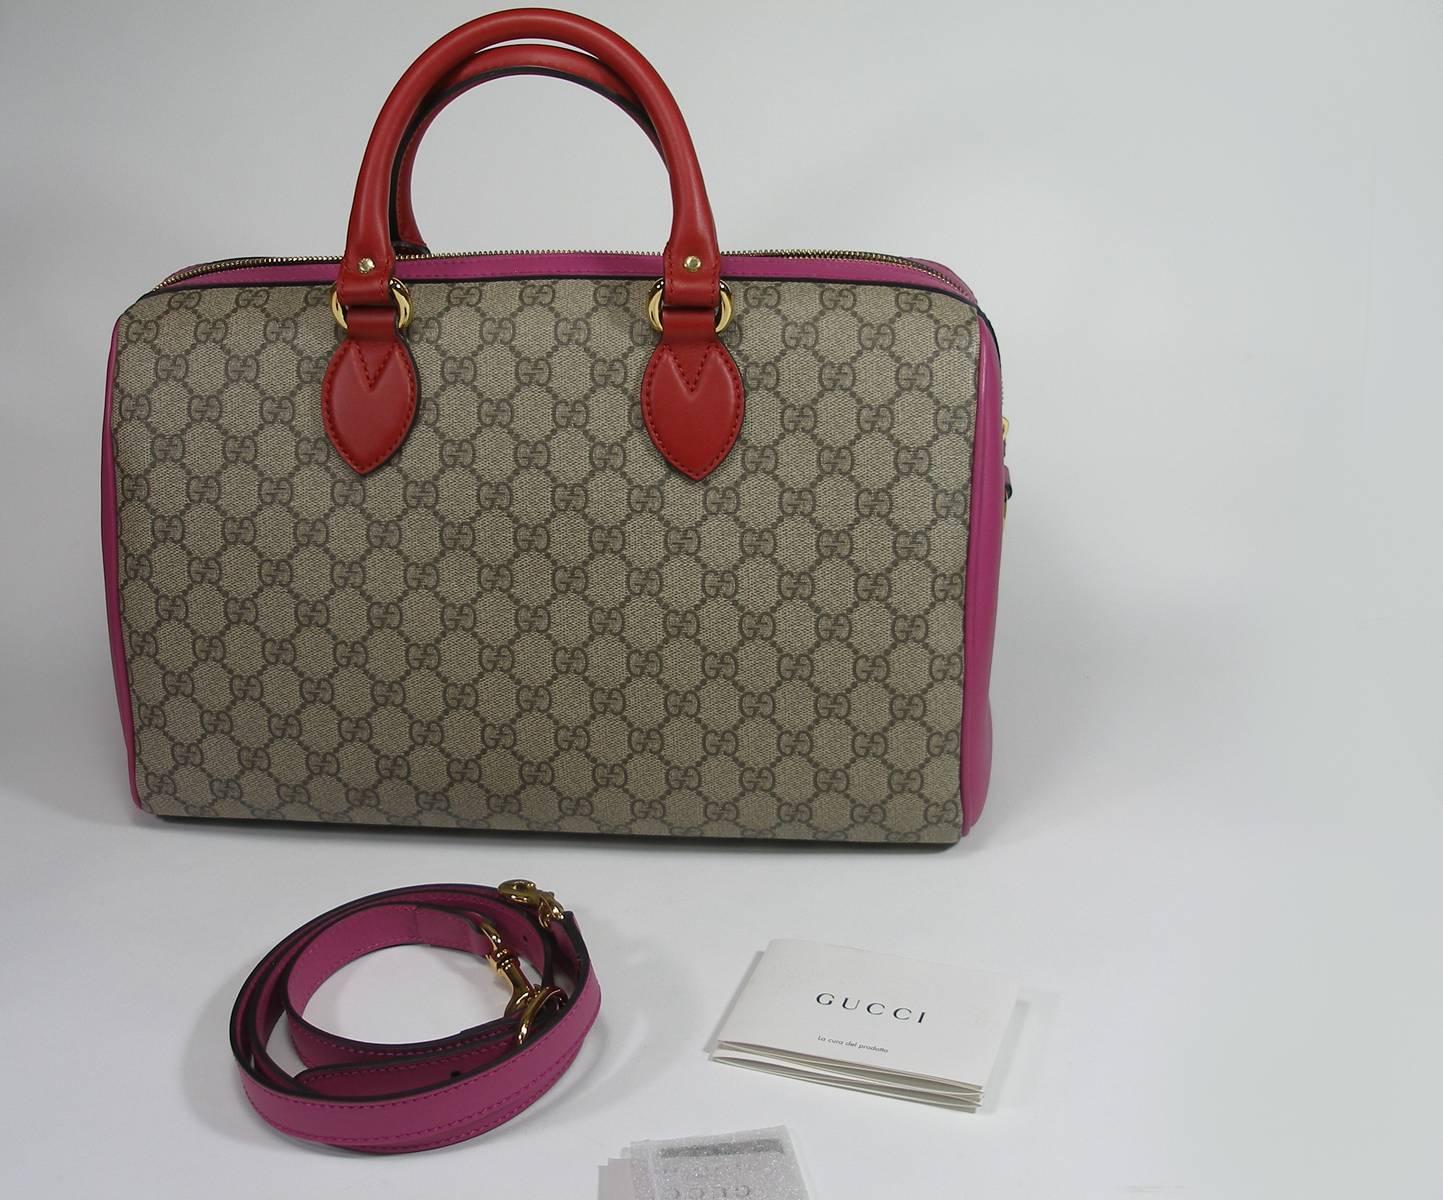 Gucci GG Supreme Top Handle Medium Boston Bag Multicolour Beige-pink-red In New Condition For Sale In VERGT, FR